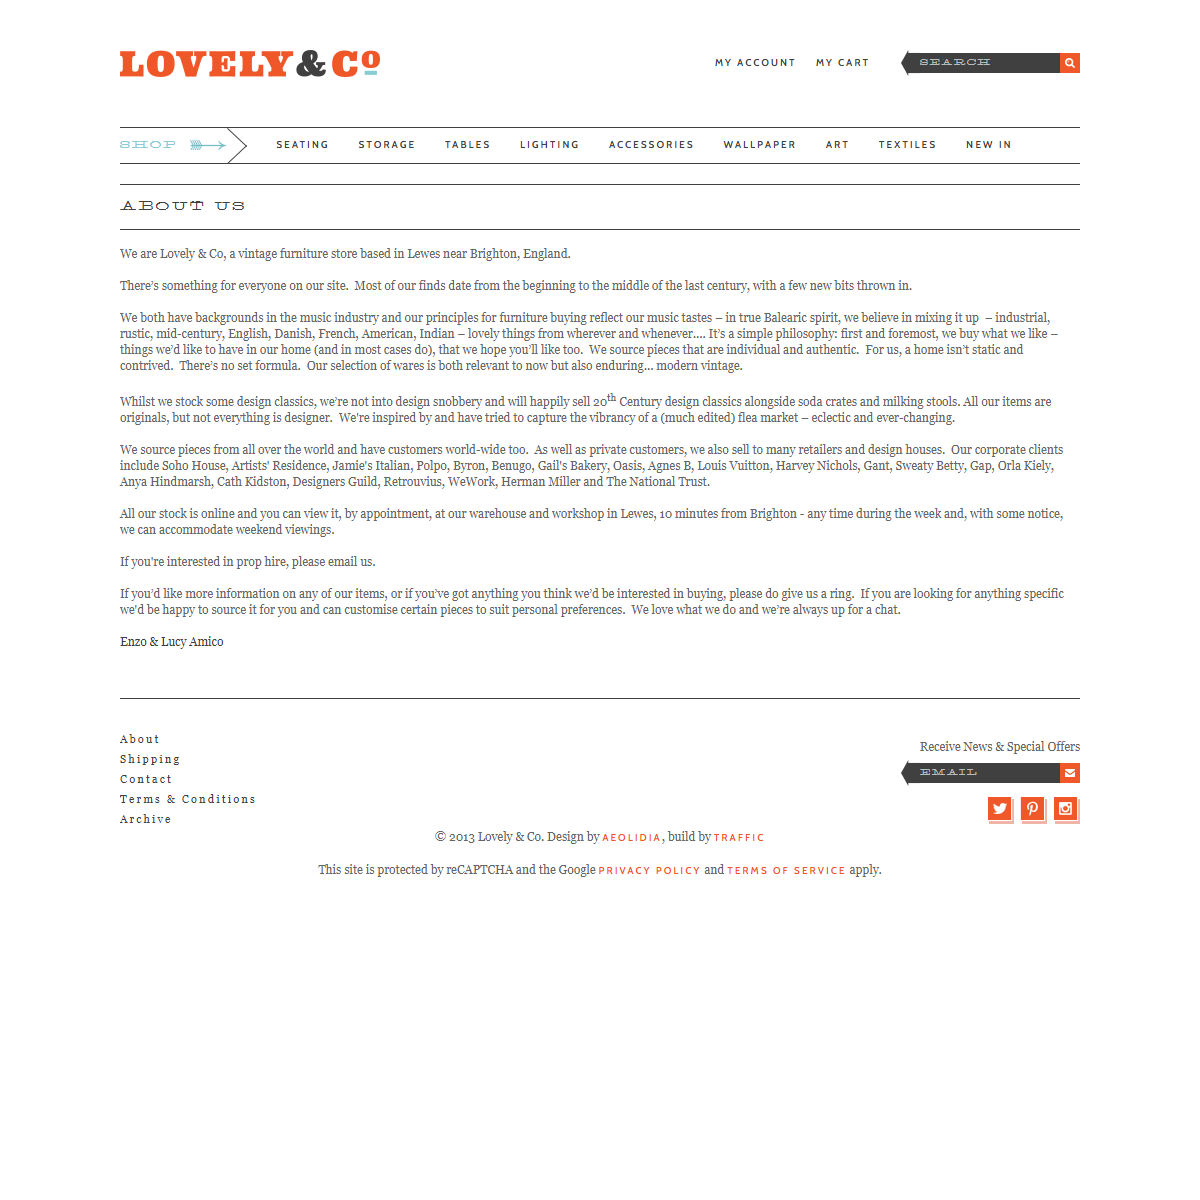 A complete backup of https://www.lovelyandco.co.uk/about/